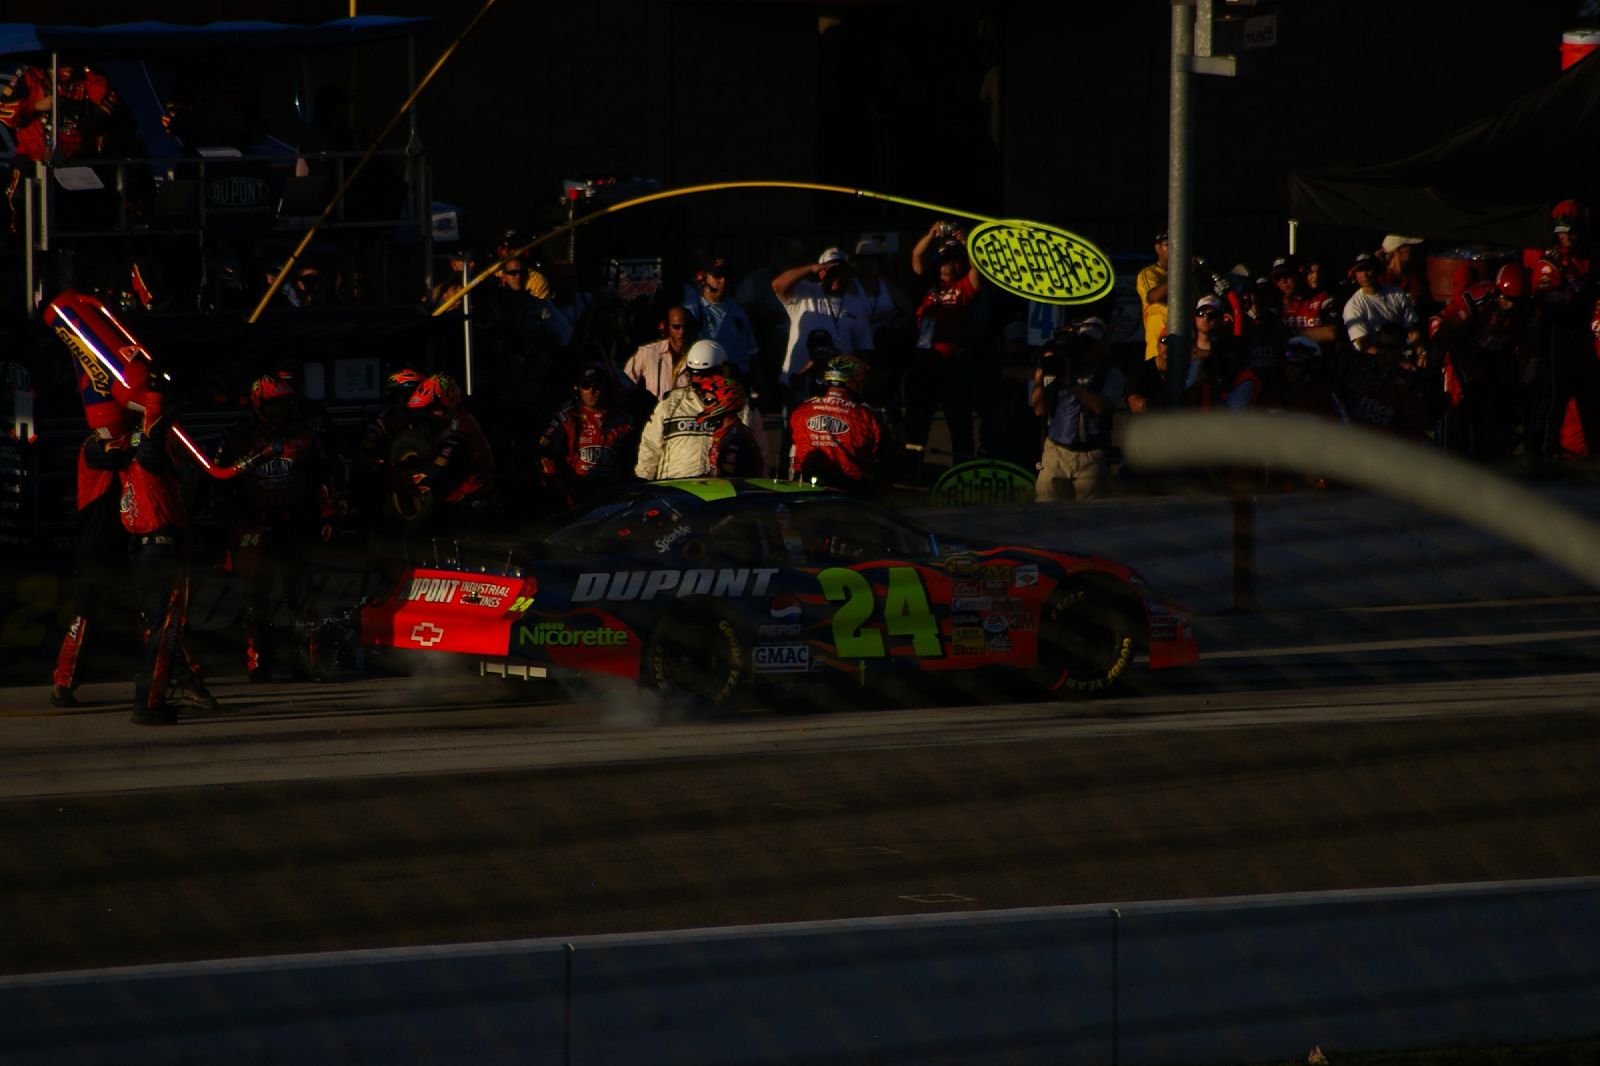 a nascar race car blowing its horn out on the track